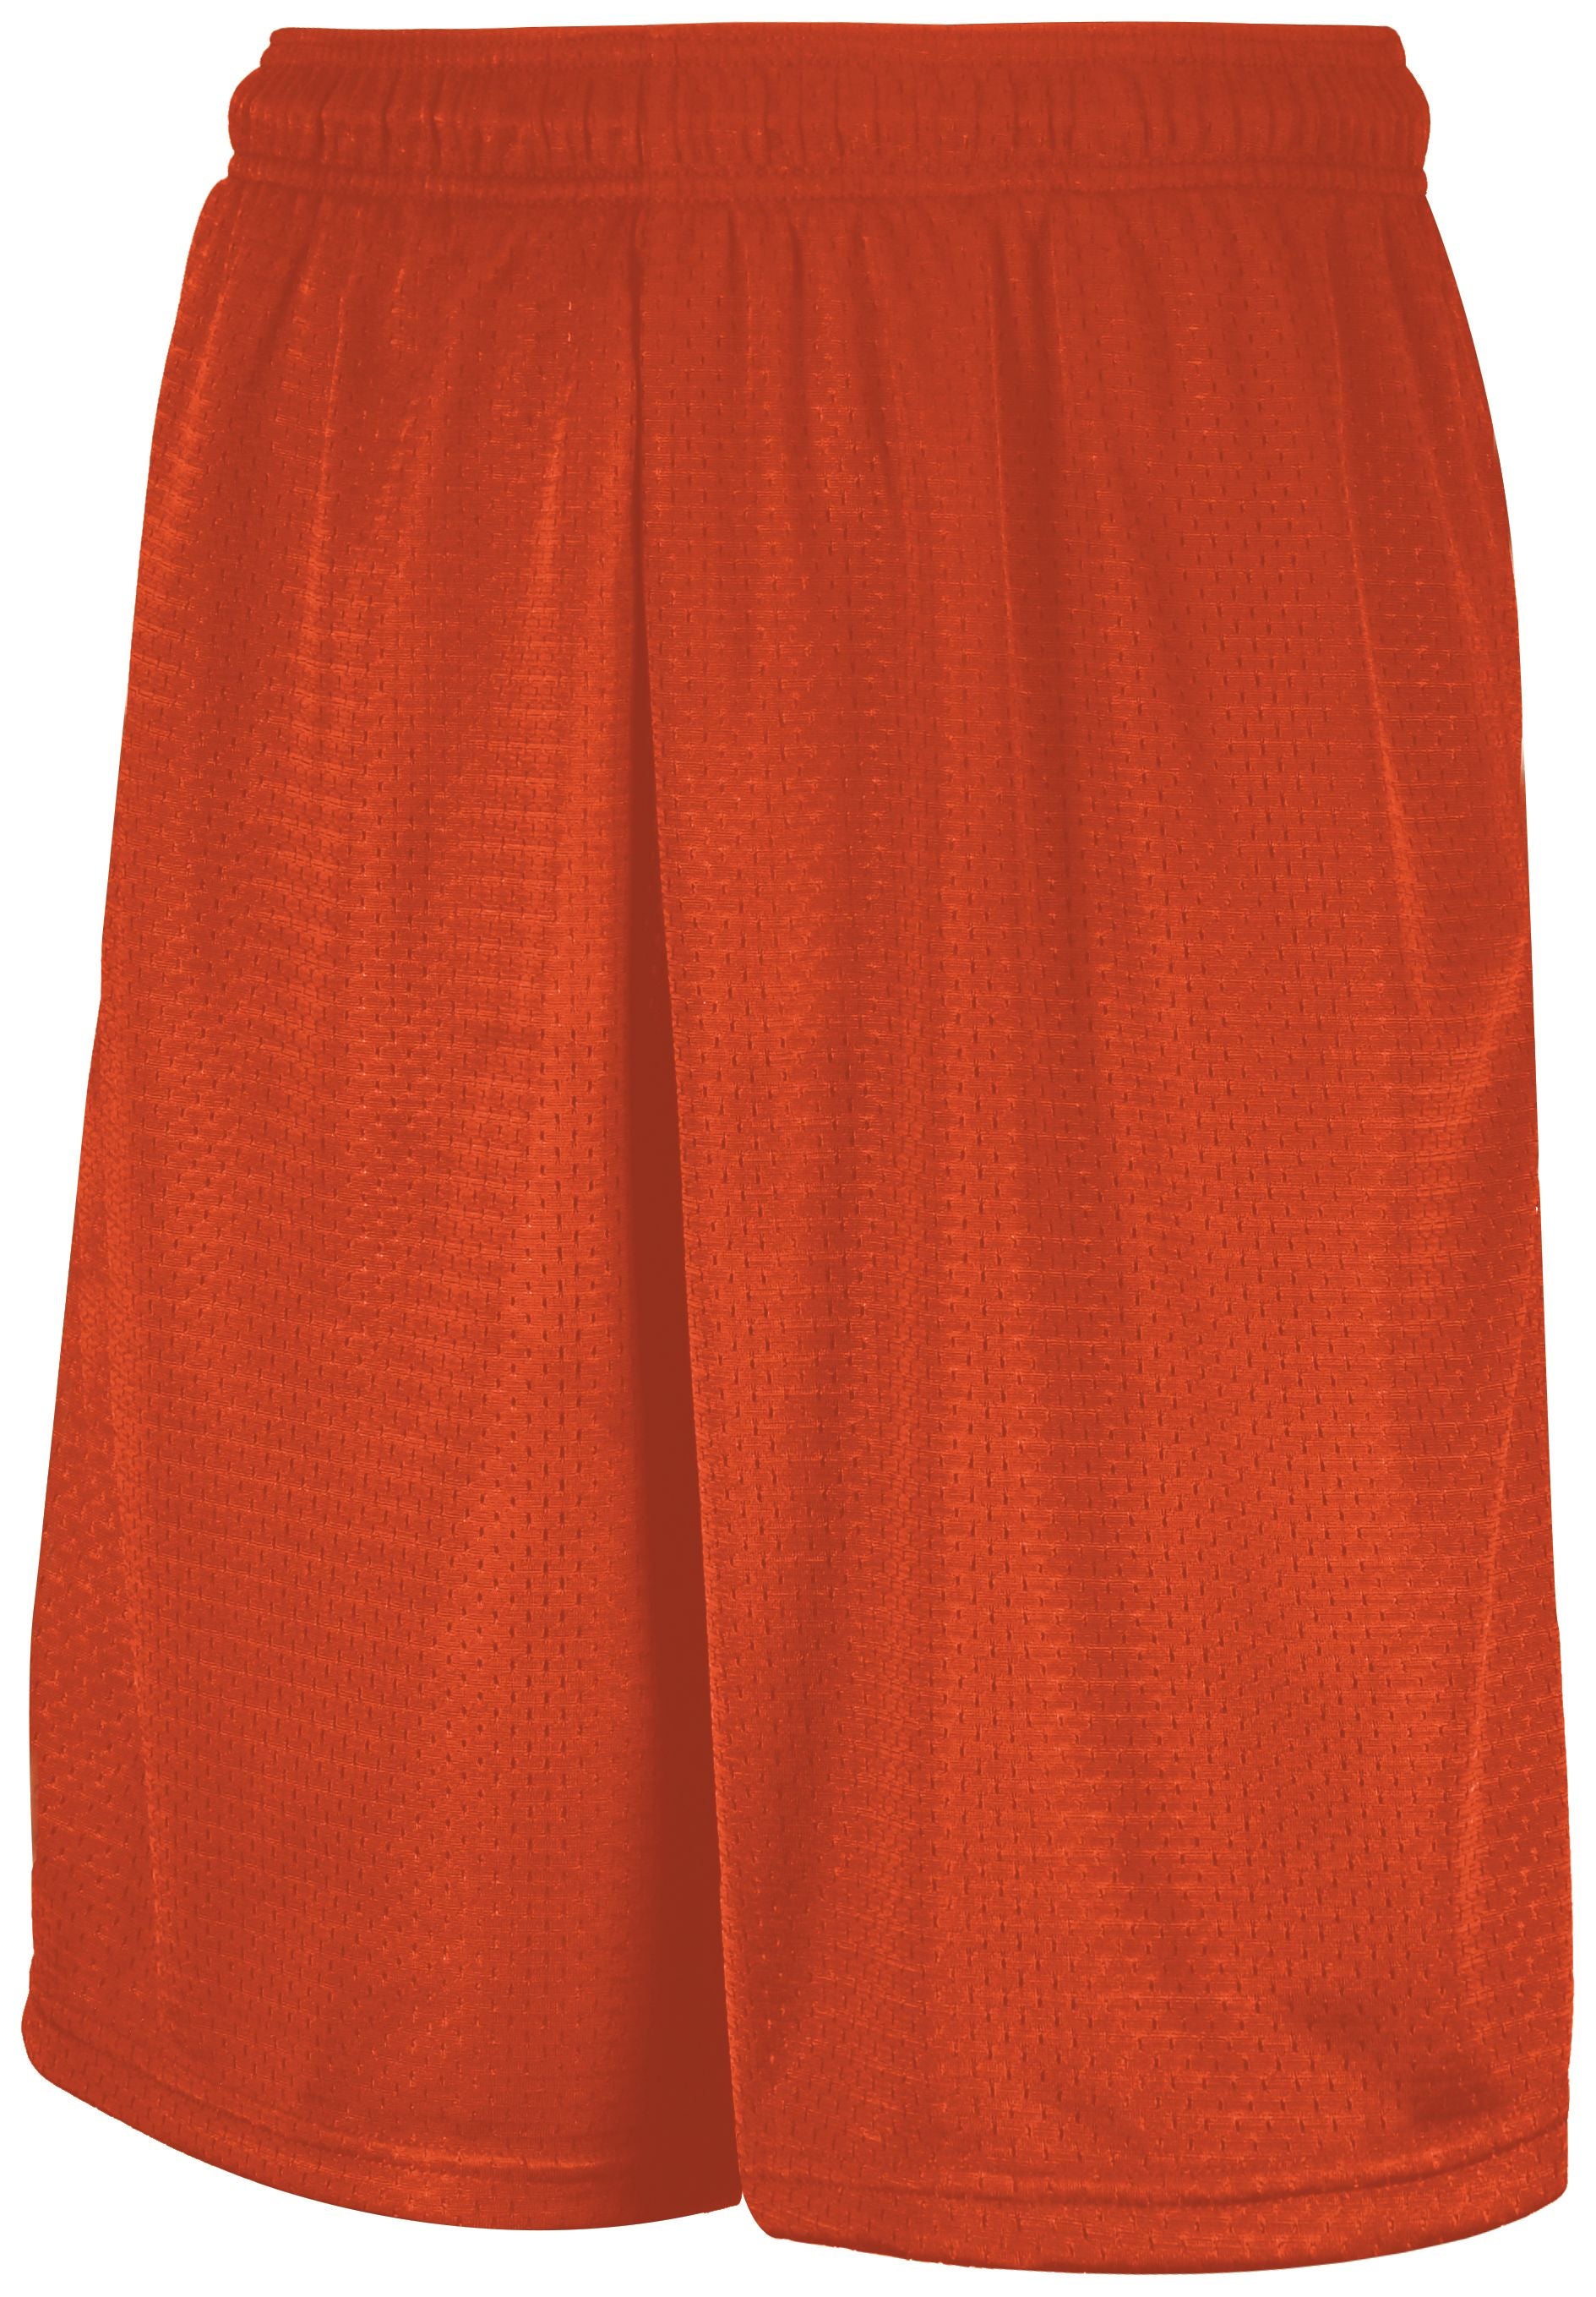 Russell Athletic Mesh Shorts With Pockets in Burnt Orange  -Part of the Adult, Adult-Shorts, Russell-Athletic-Products product lines at KanaleyCreations.com